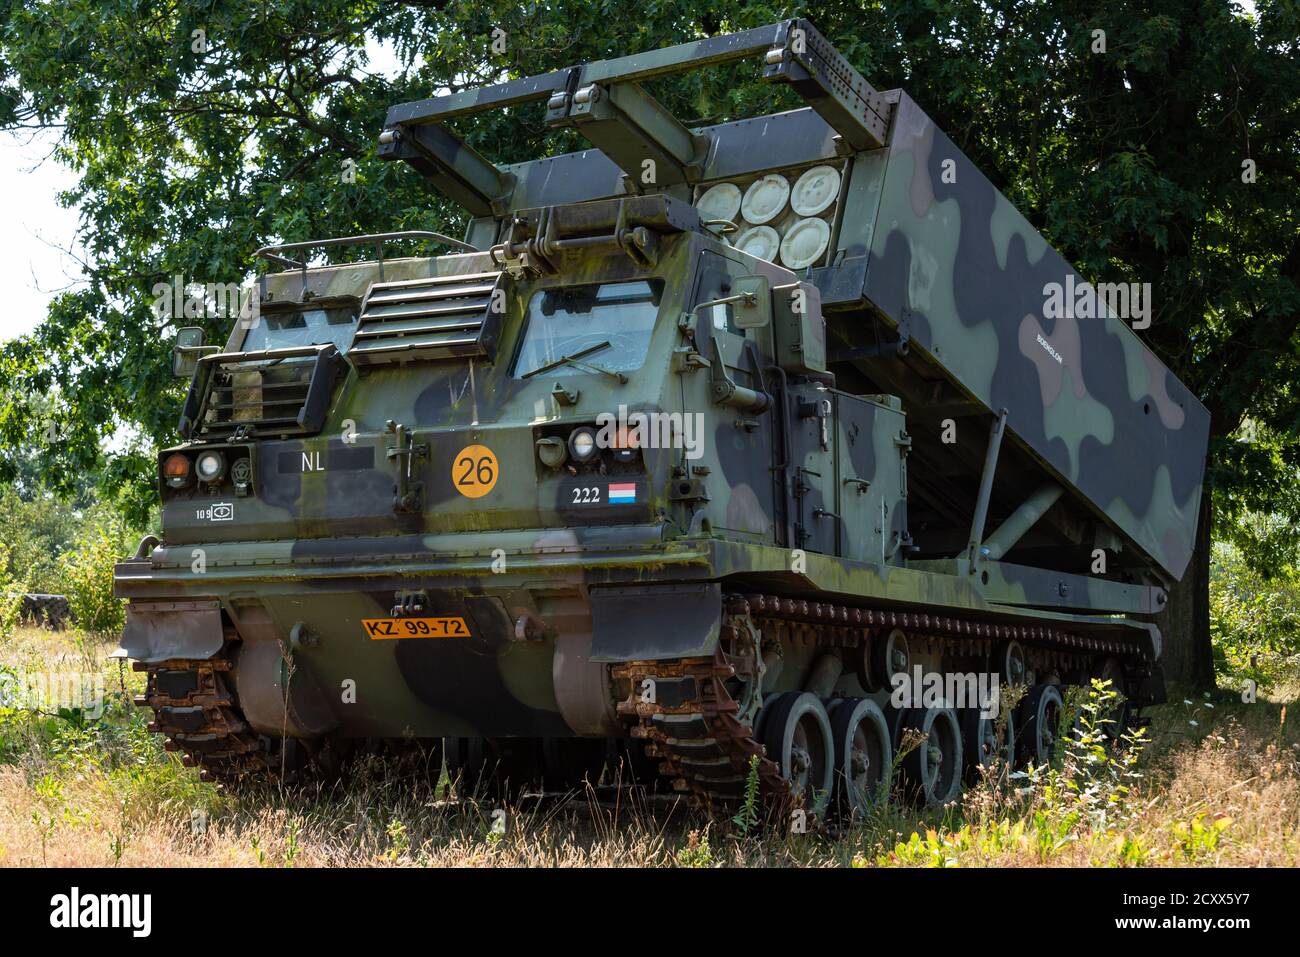 A M270 Multiple Launch Rocket System (MLRS) of the Royal Netherlands Army. Stock Photo